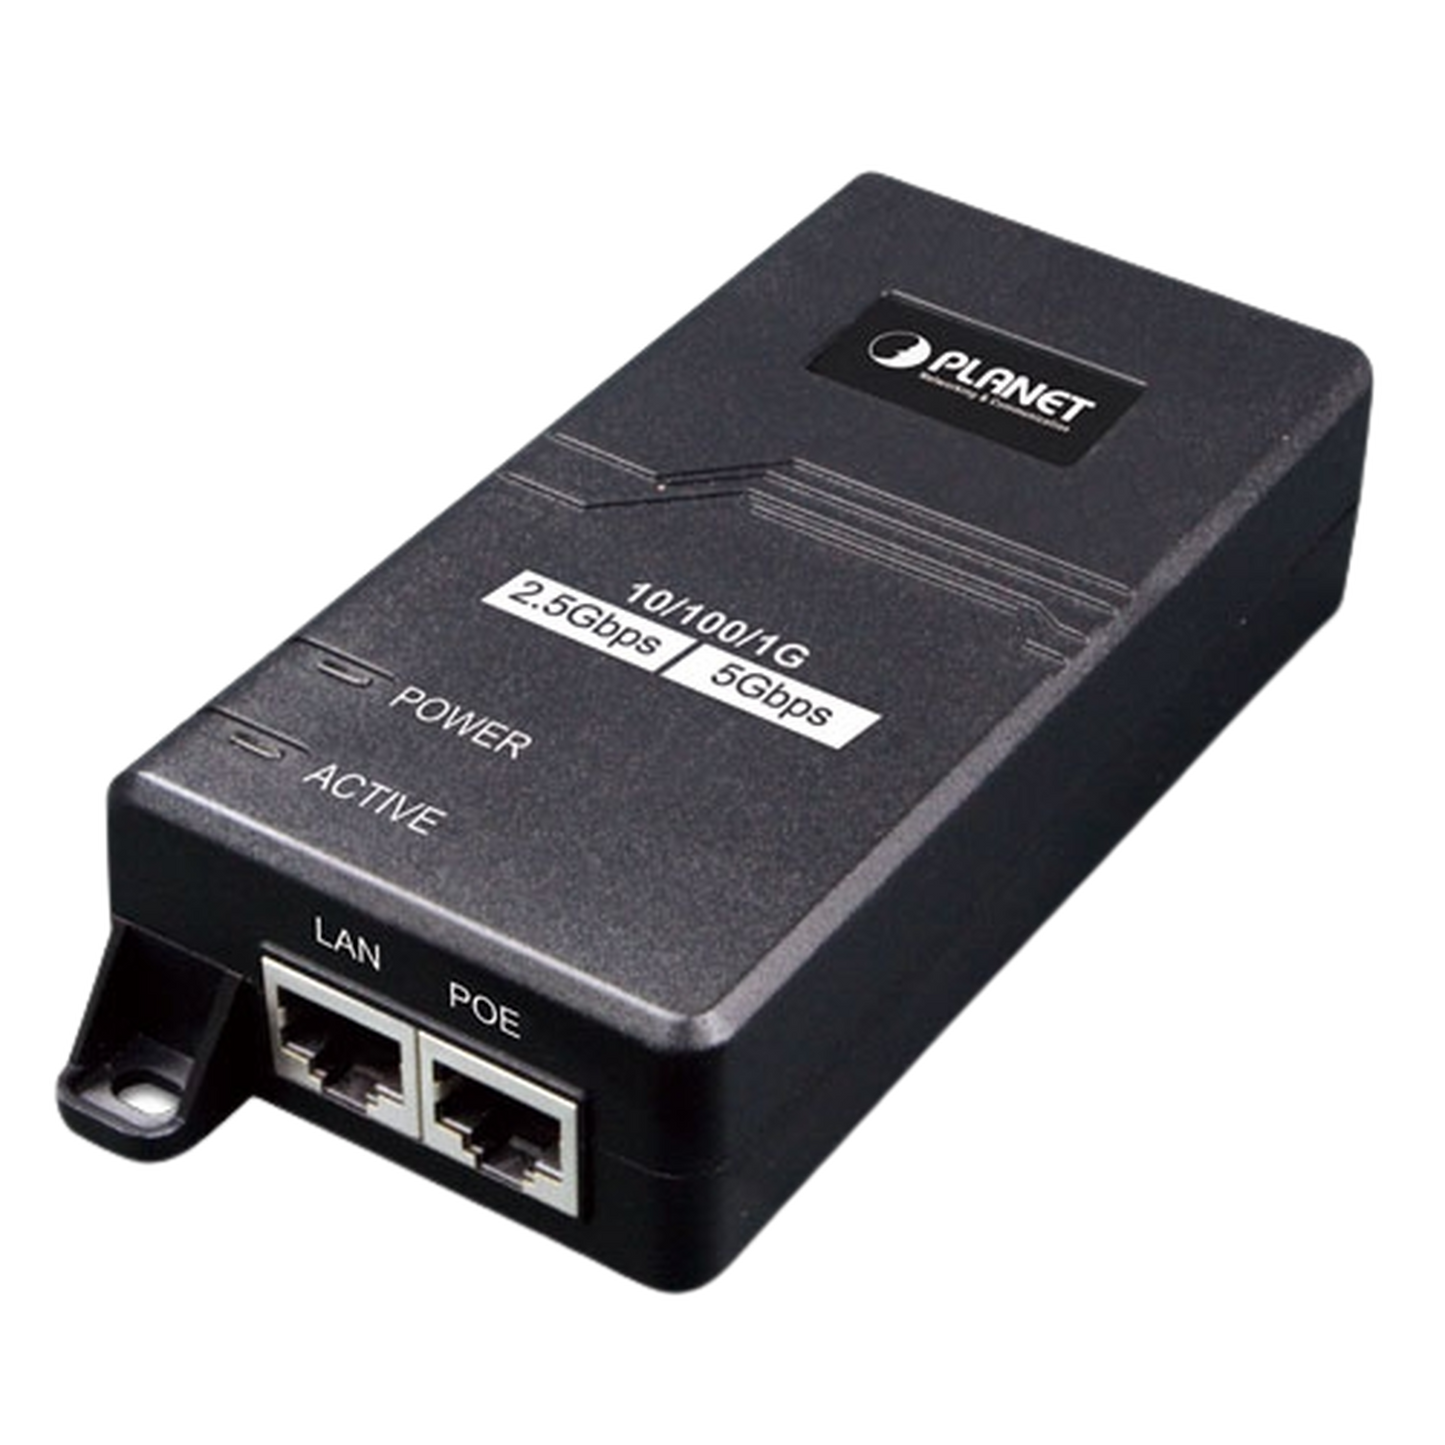 Inyector PoE 802.3 af/at, Hasta 30 W, con Puertos de 10/100/1000Mbps/ 2.5 Gbps/5 Gbps